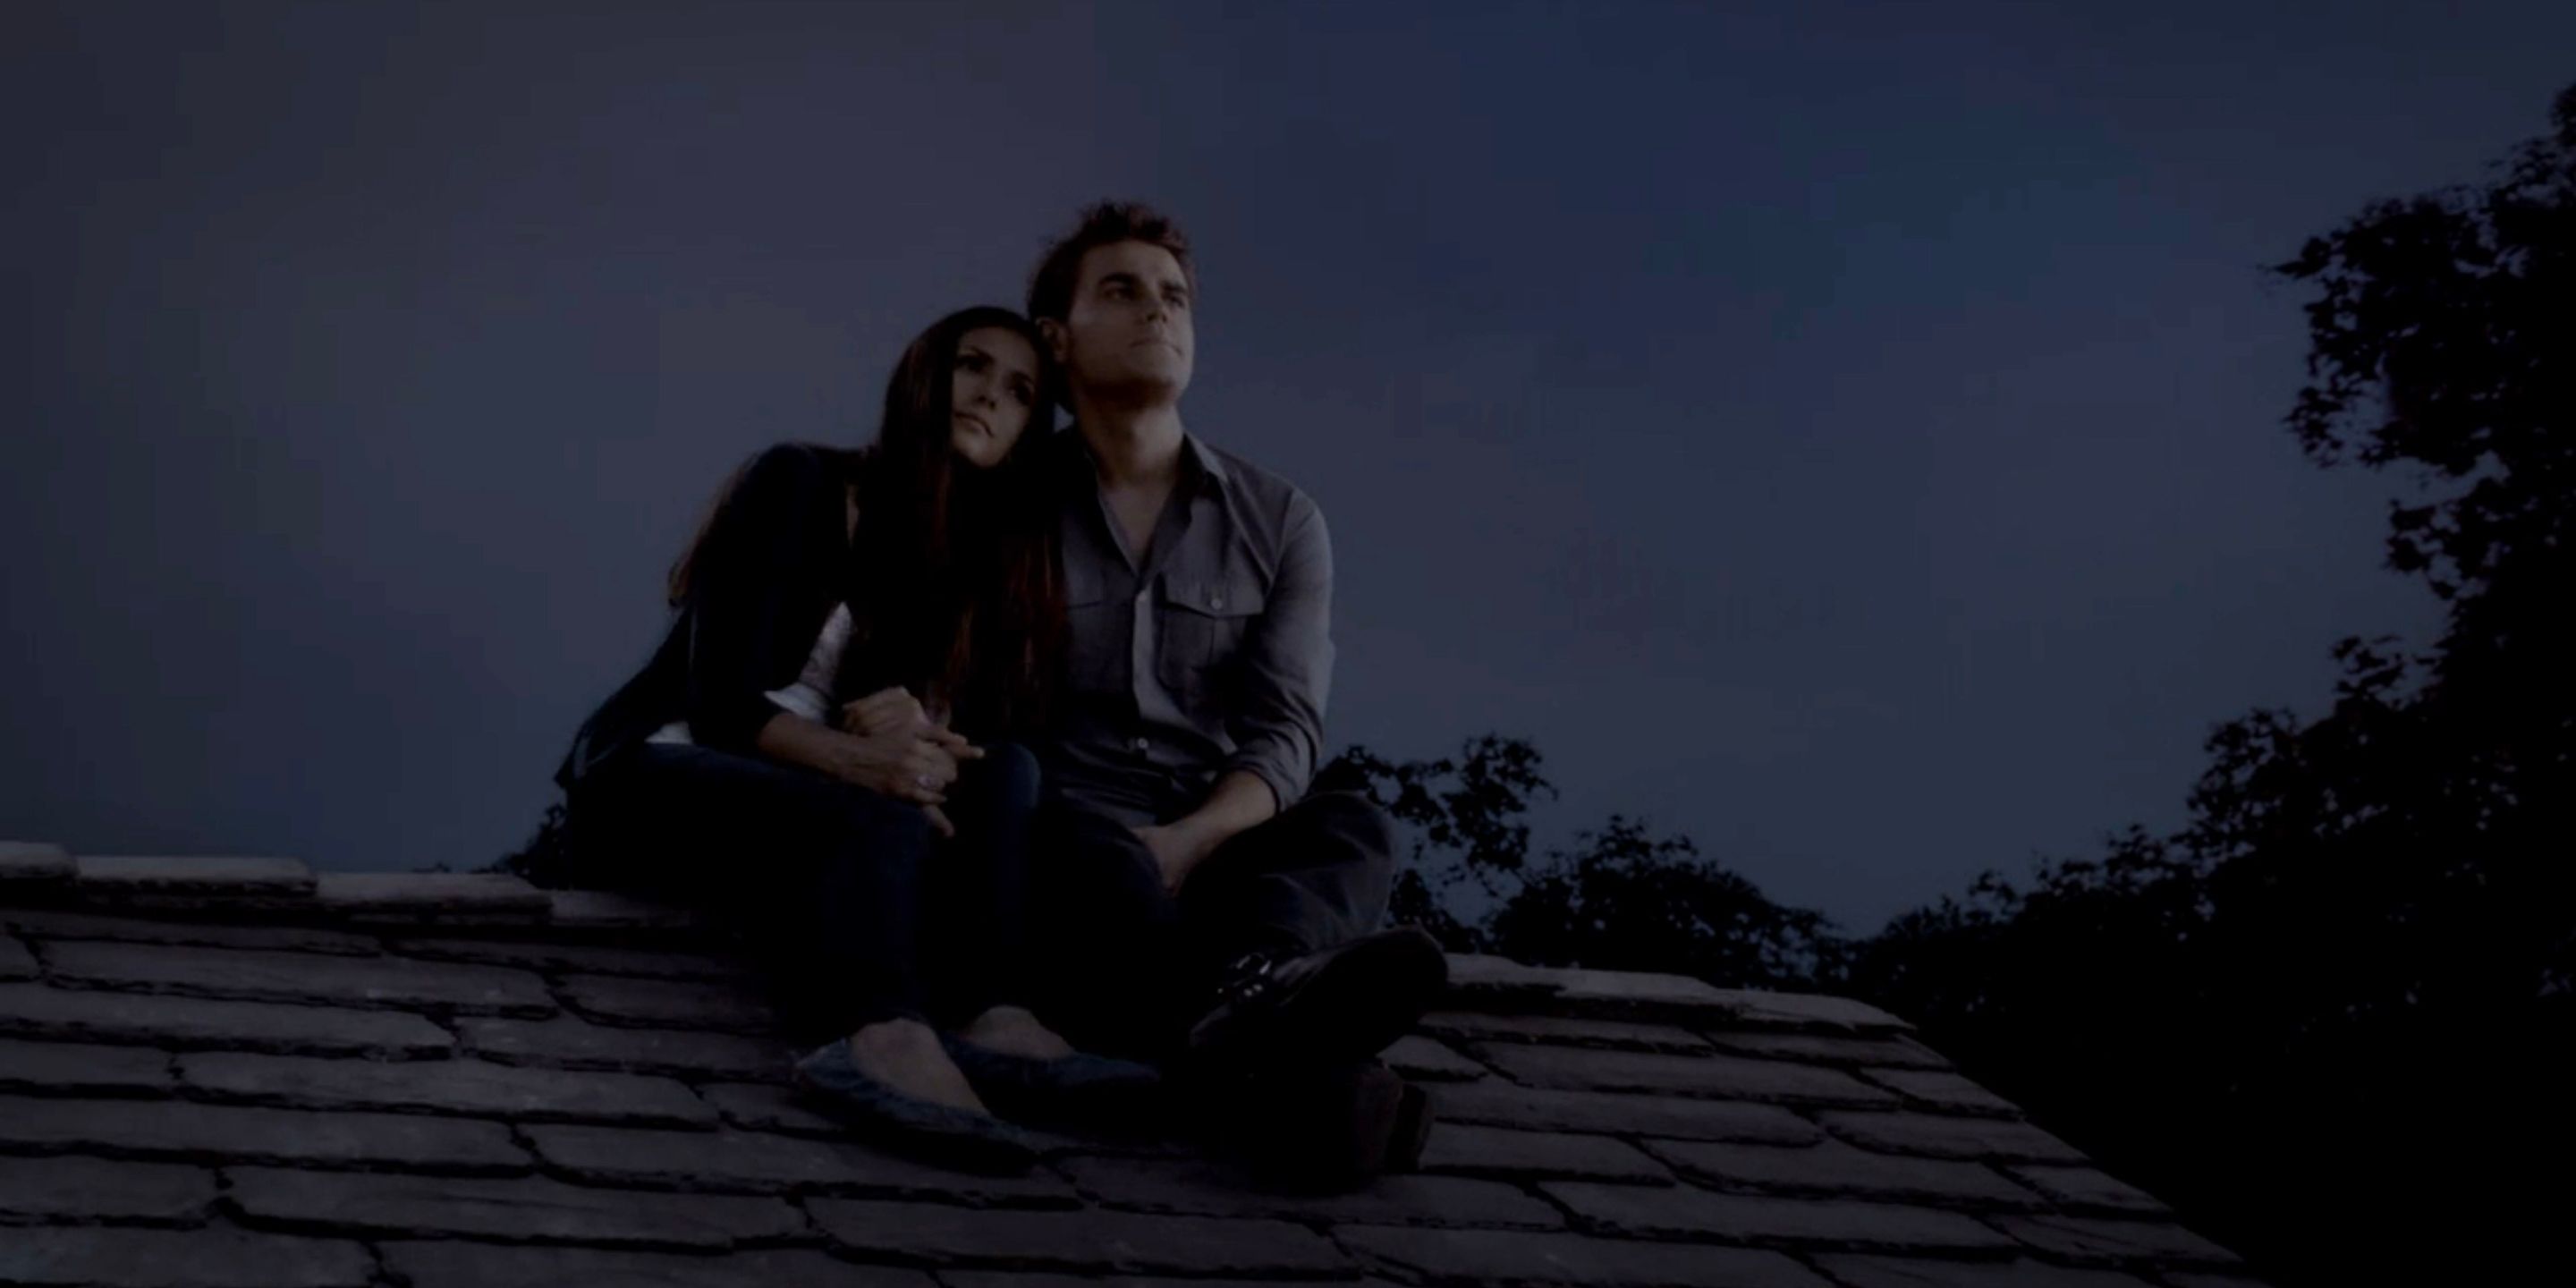 Stefan and Elena cuddle on the roof in The Vampire Diaries.